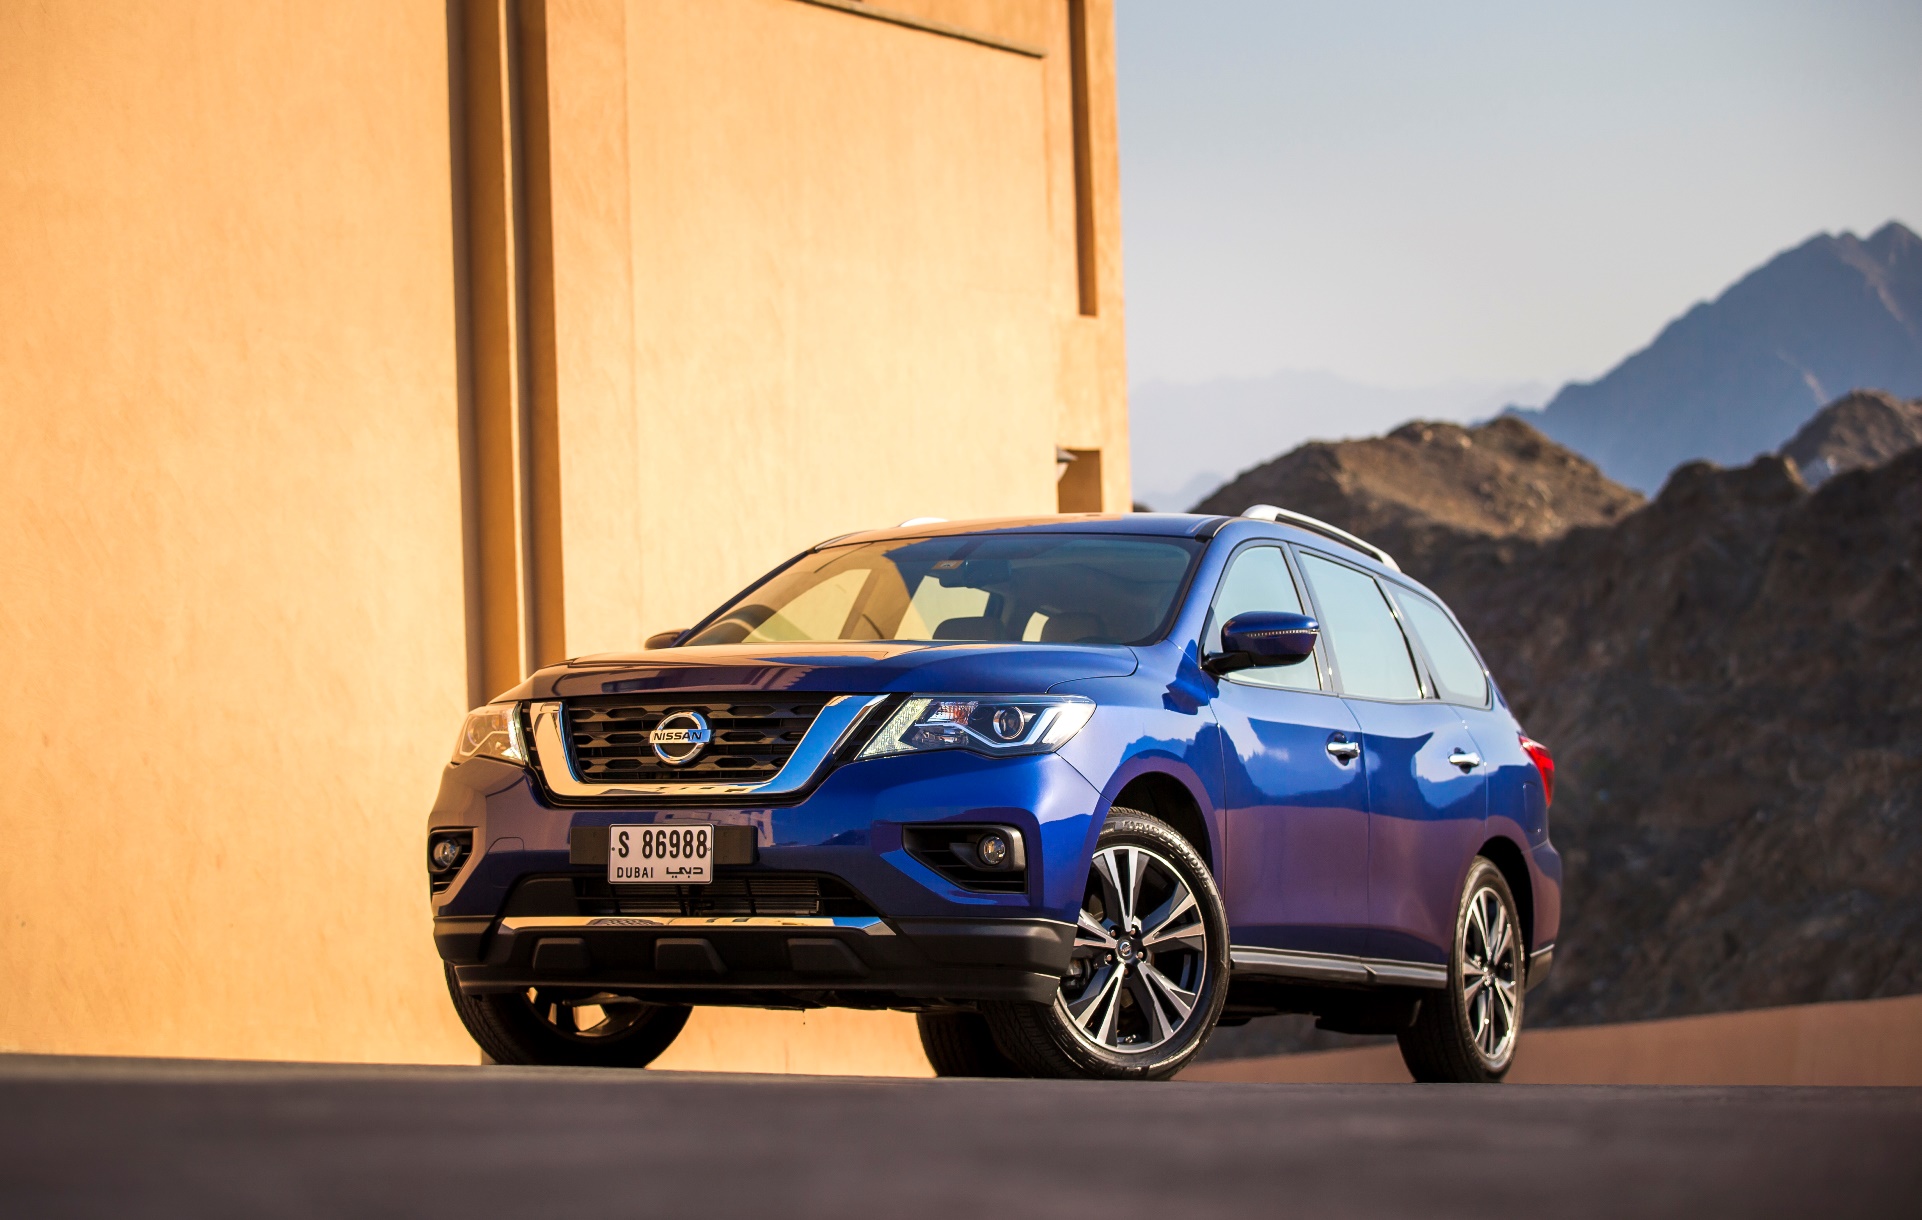 2018 Nissan Pathfinder Ups Adventure-Ready Credentials with Refined Specs